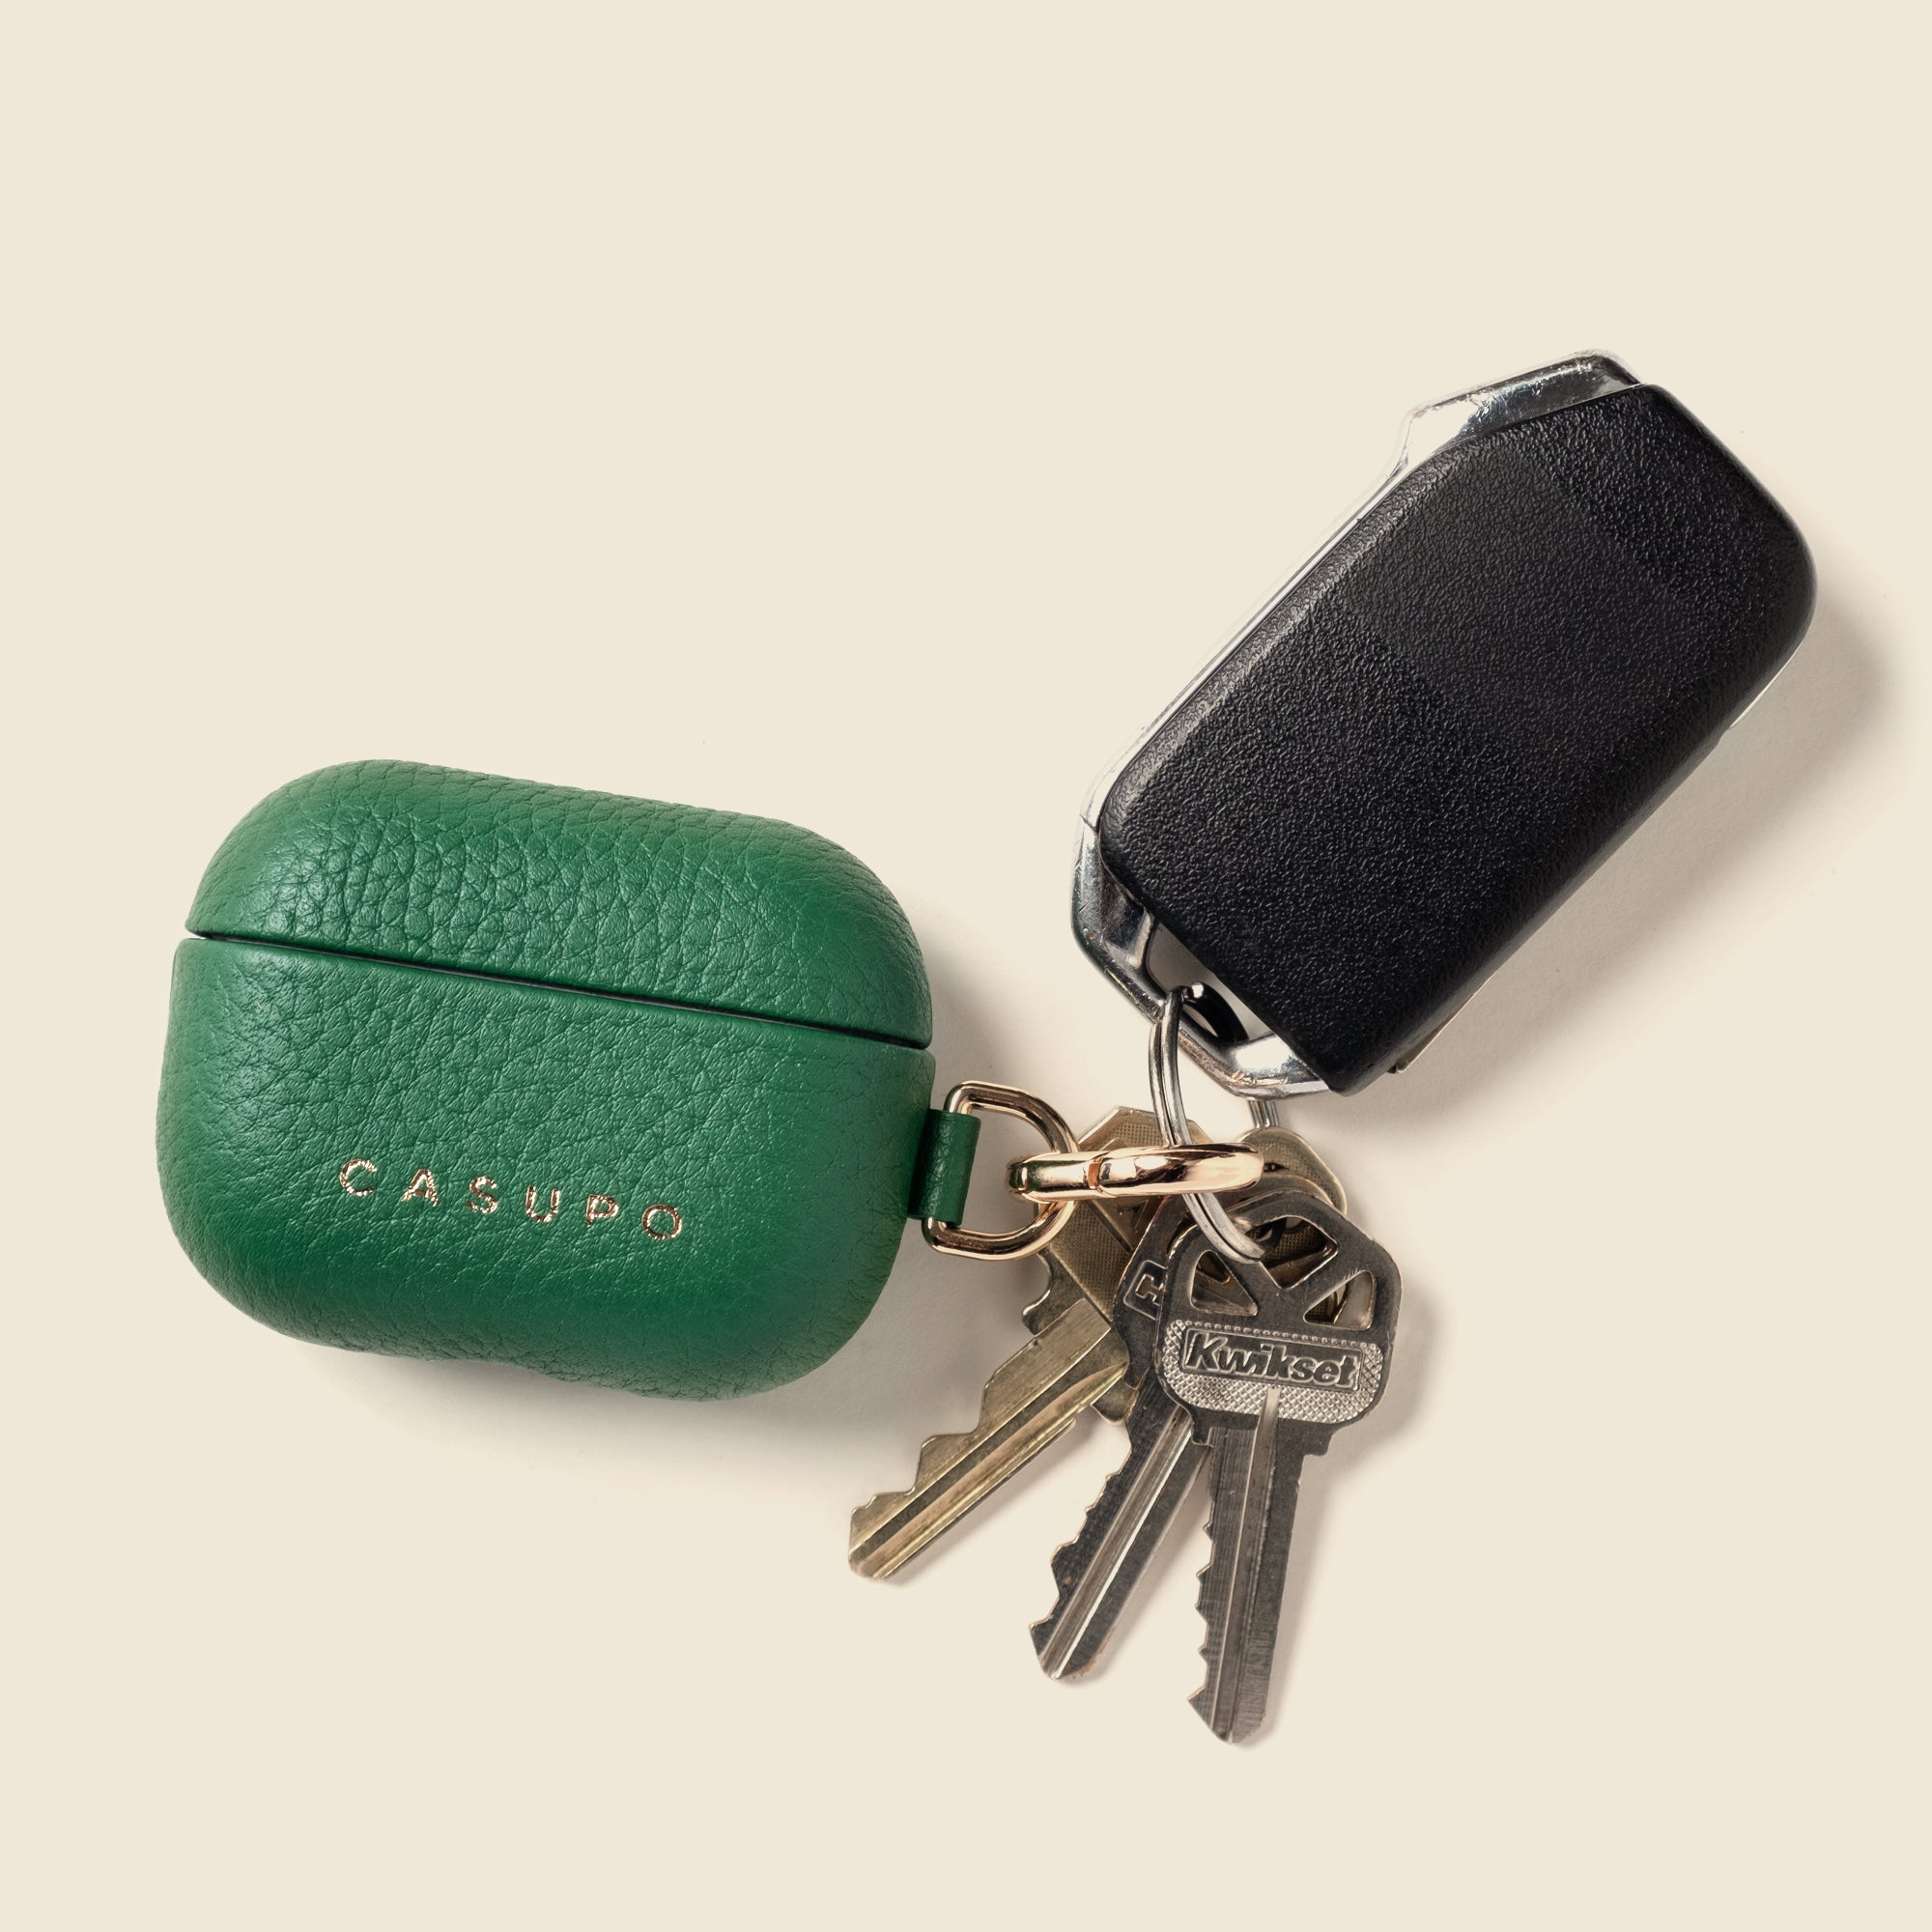 Green leather airpod case with key ring